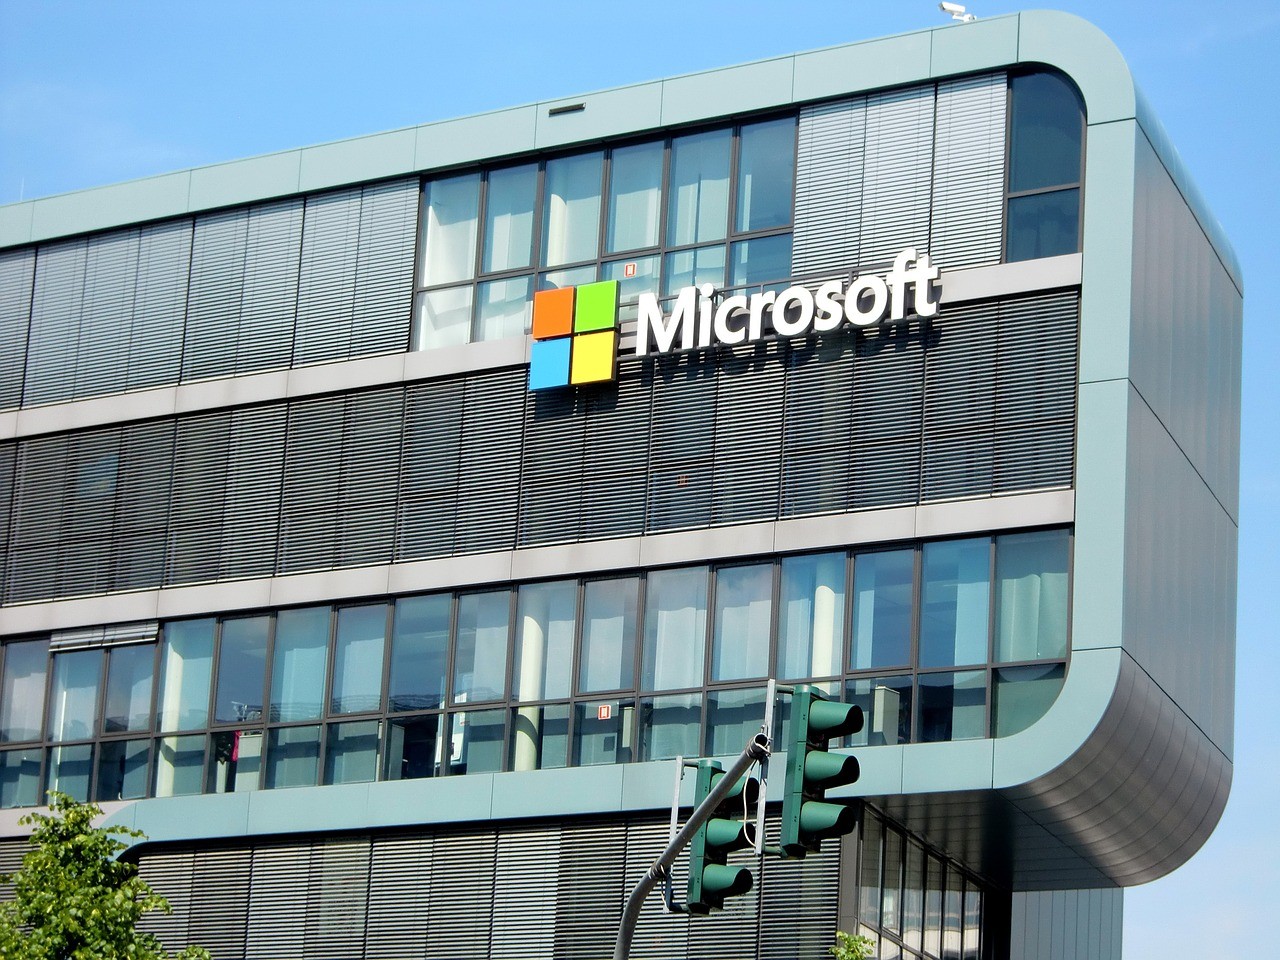 A Major Setback As Microsoft’s Slow Growth Has Forced It To Cut Jobs